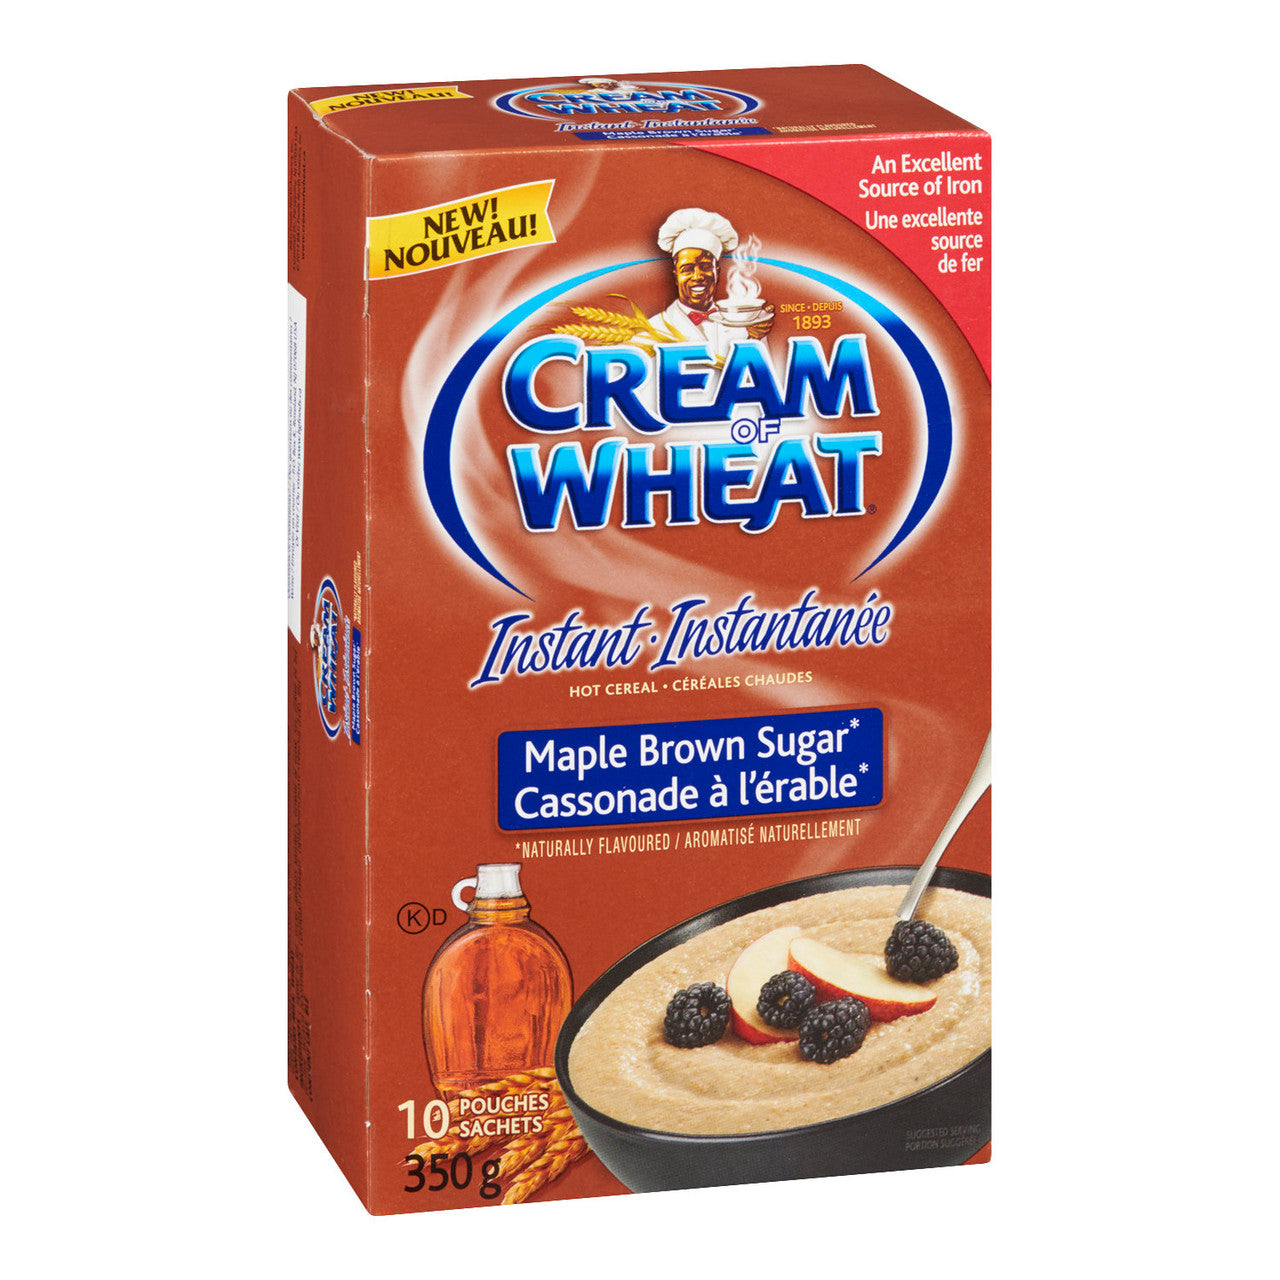 Cream of Wheat Instant Maple Brown Sugar Hot Cereal, 350g/12.25 oz. Box {Imported from Canada}